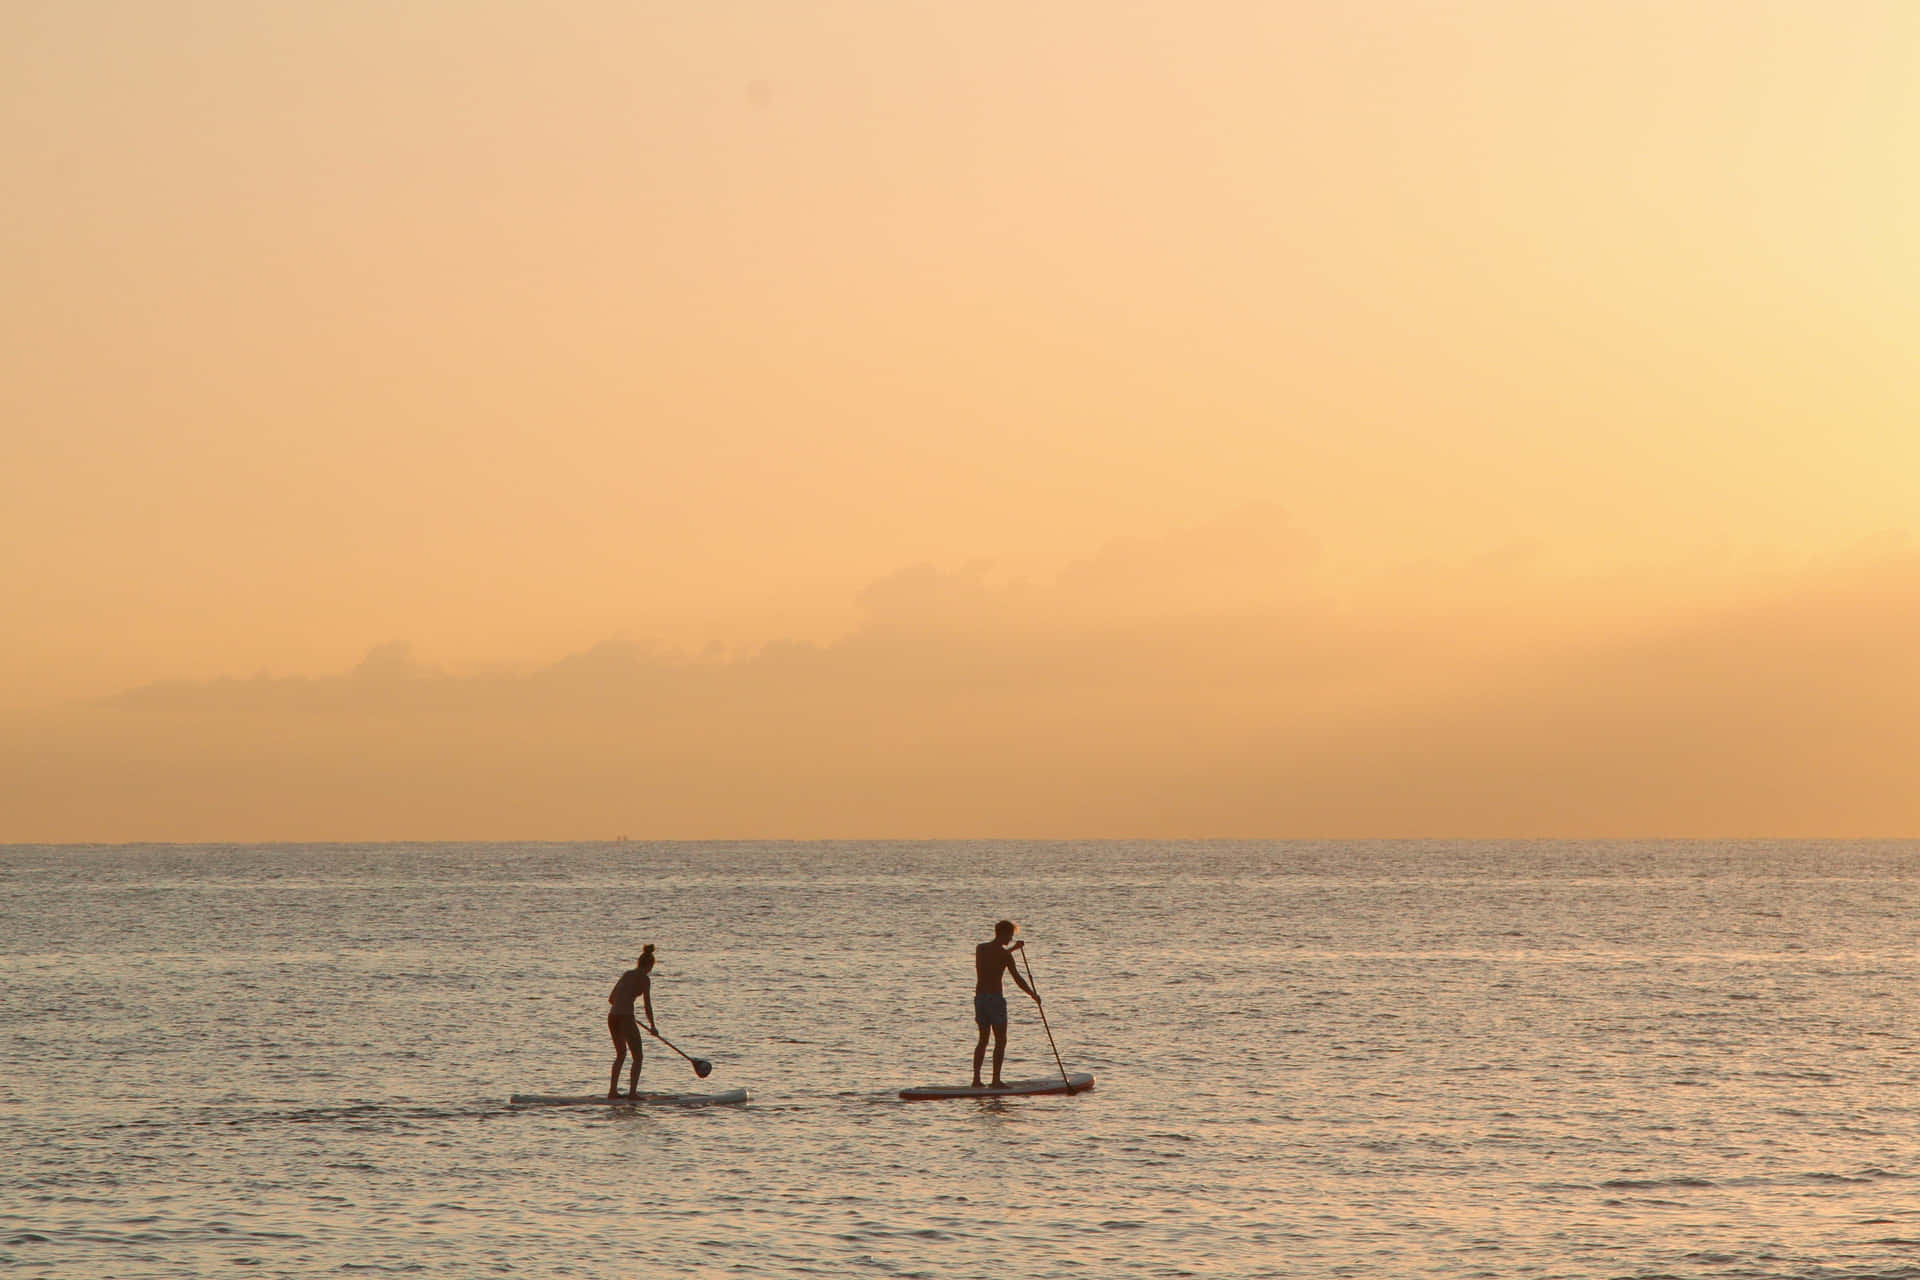 Paddleboarder gliding on calm water during sunset Wallpaper